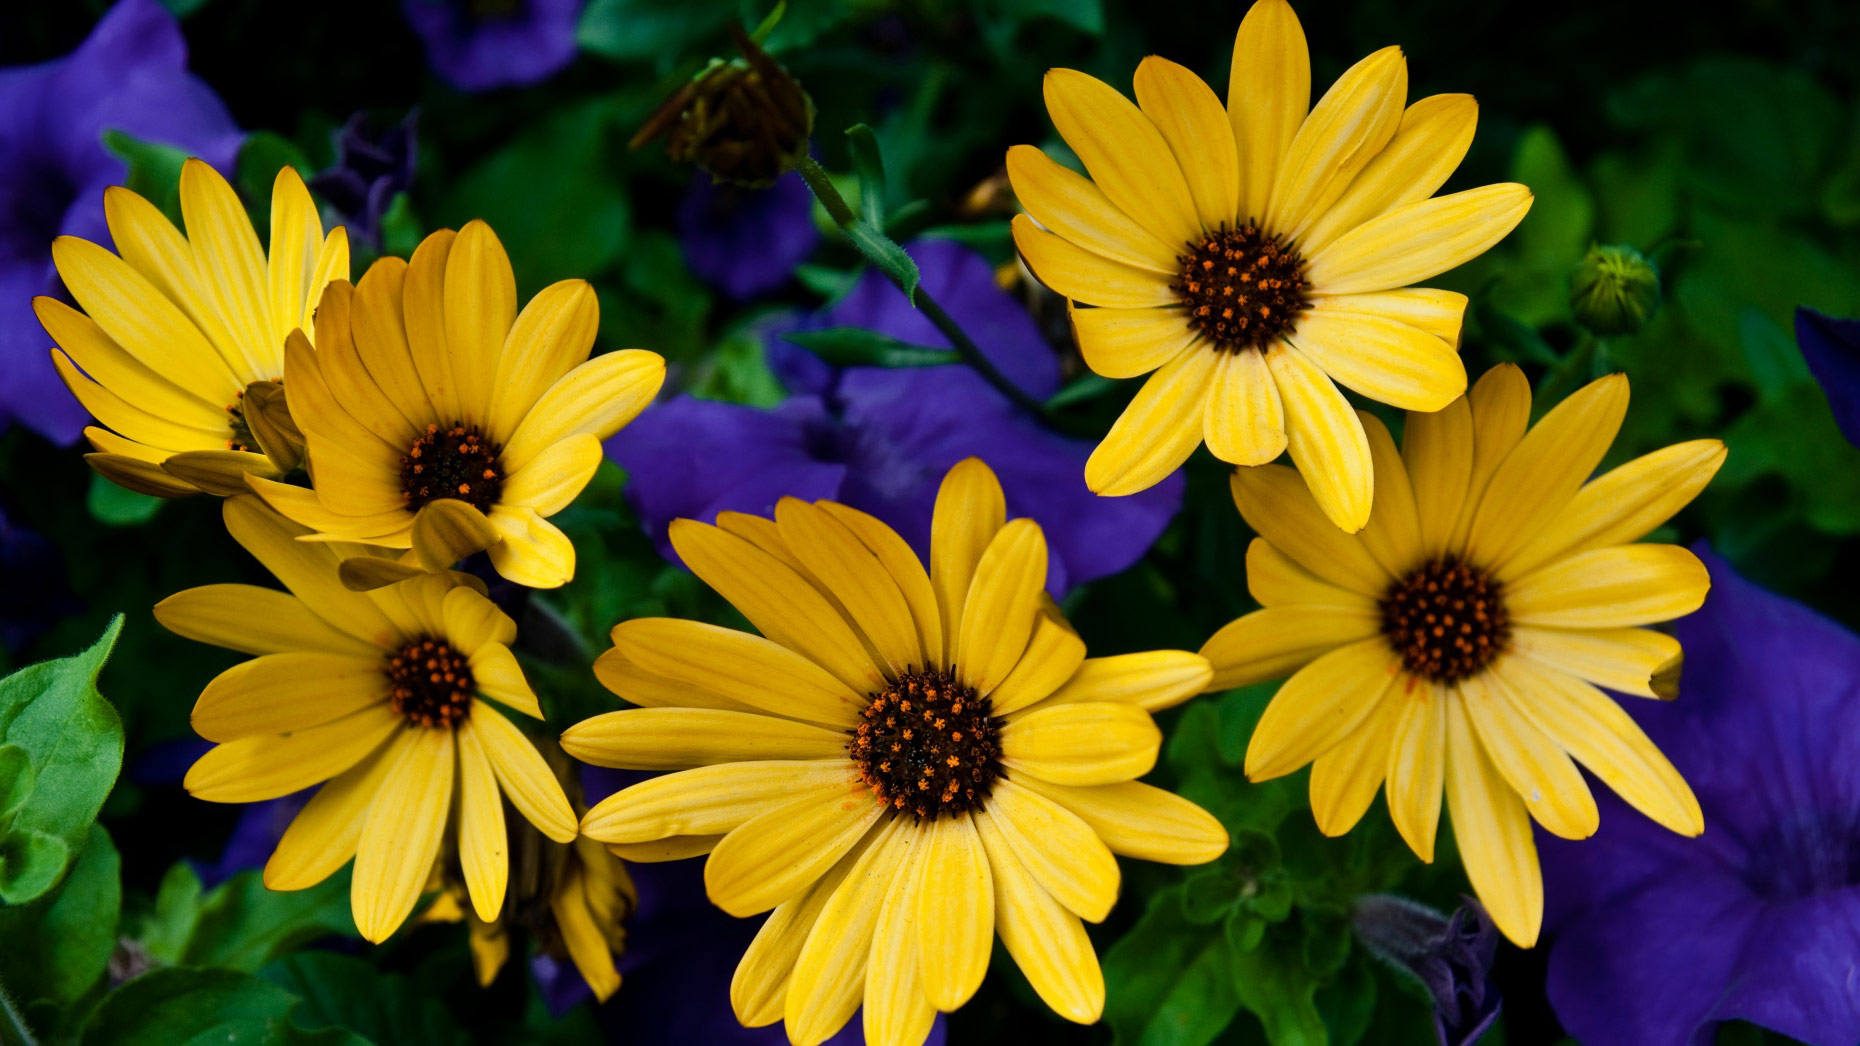 Yellow Flowers Google Covers - Google Plus Covers Photos